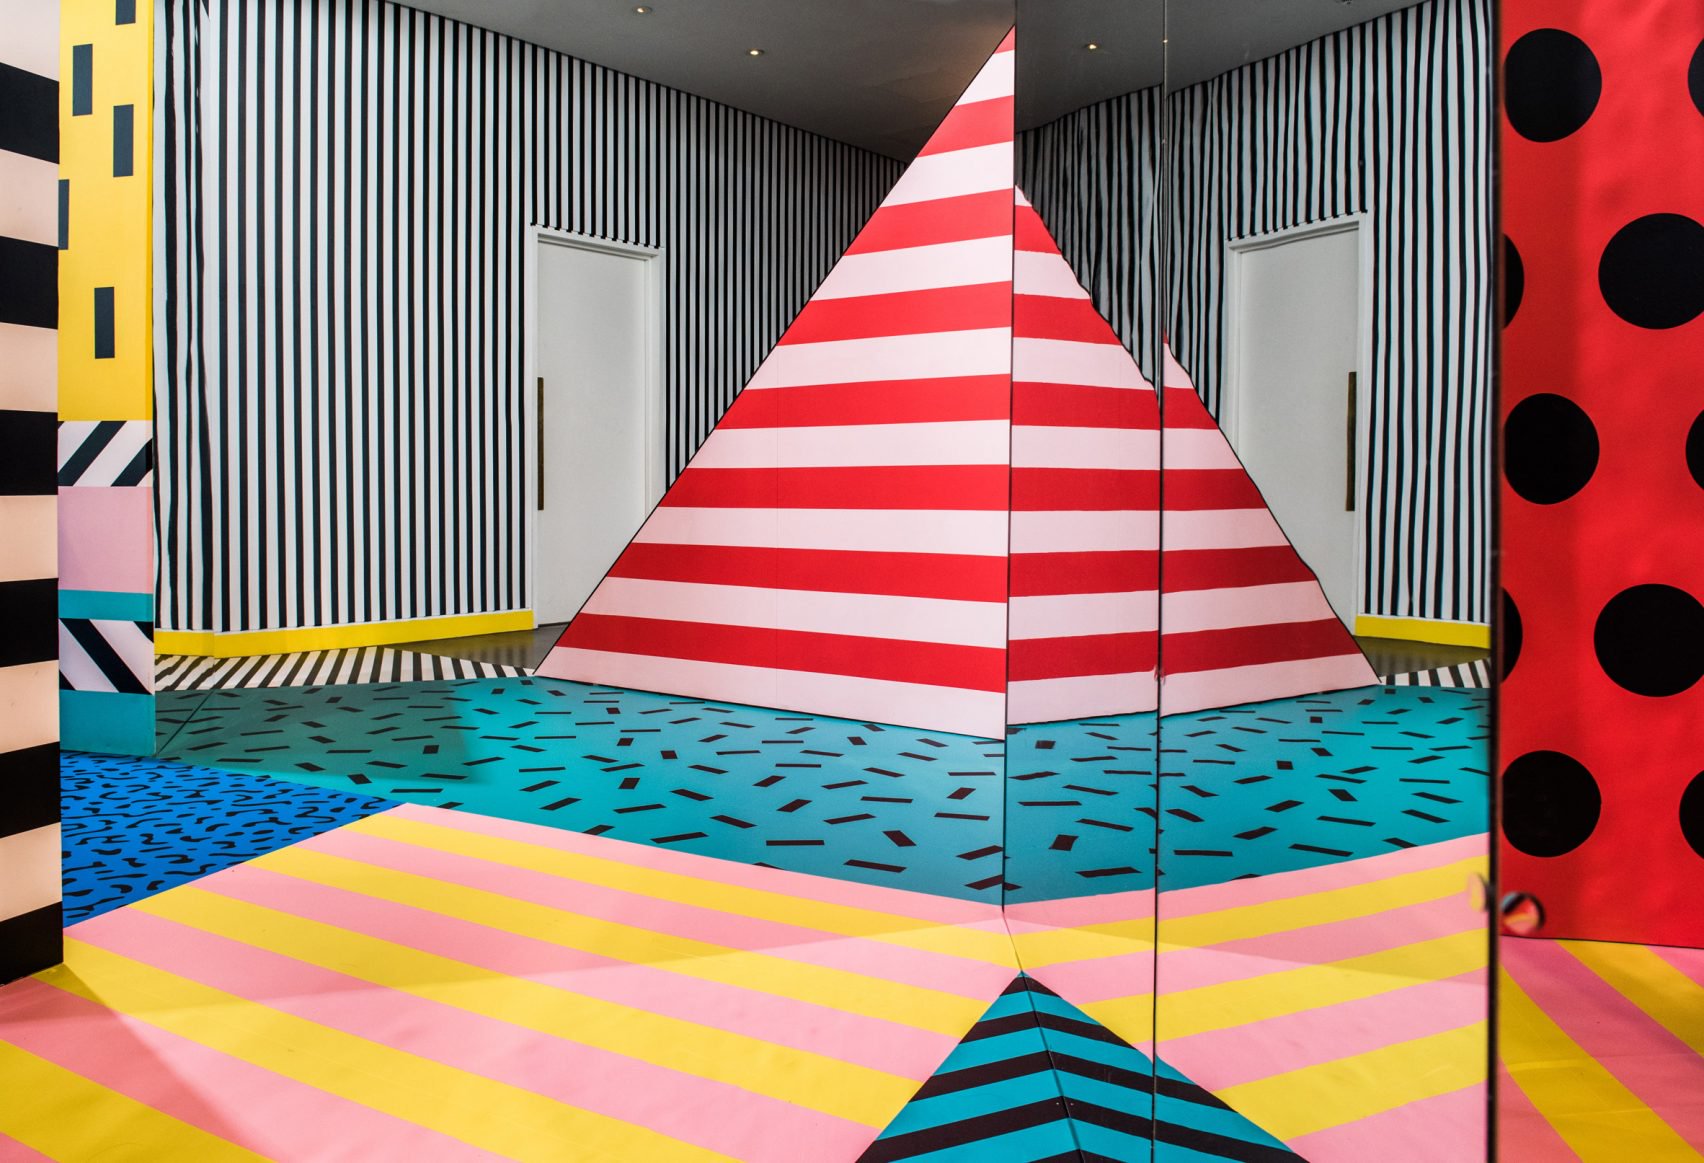 camille-walala-play-installation-now-gallery-london_dezeen_2364_col_18-1704x1163